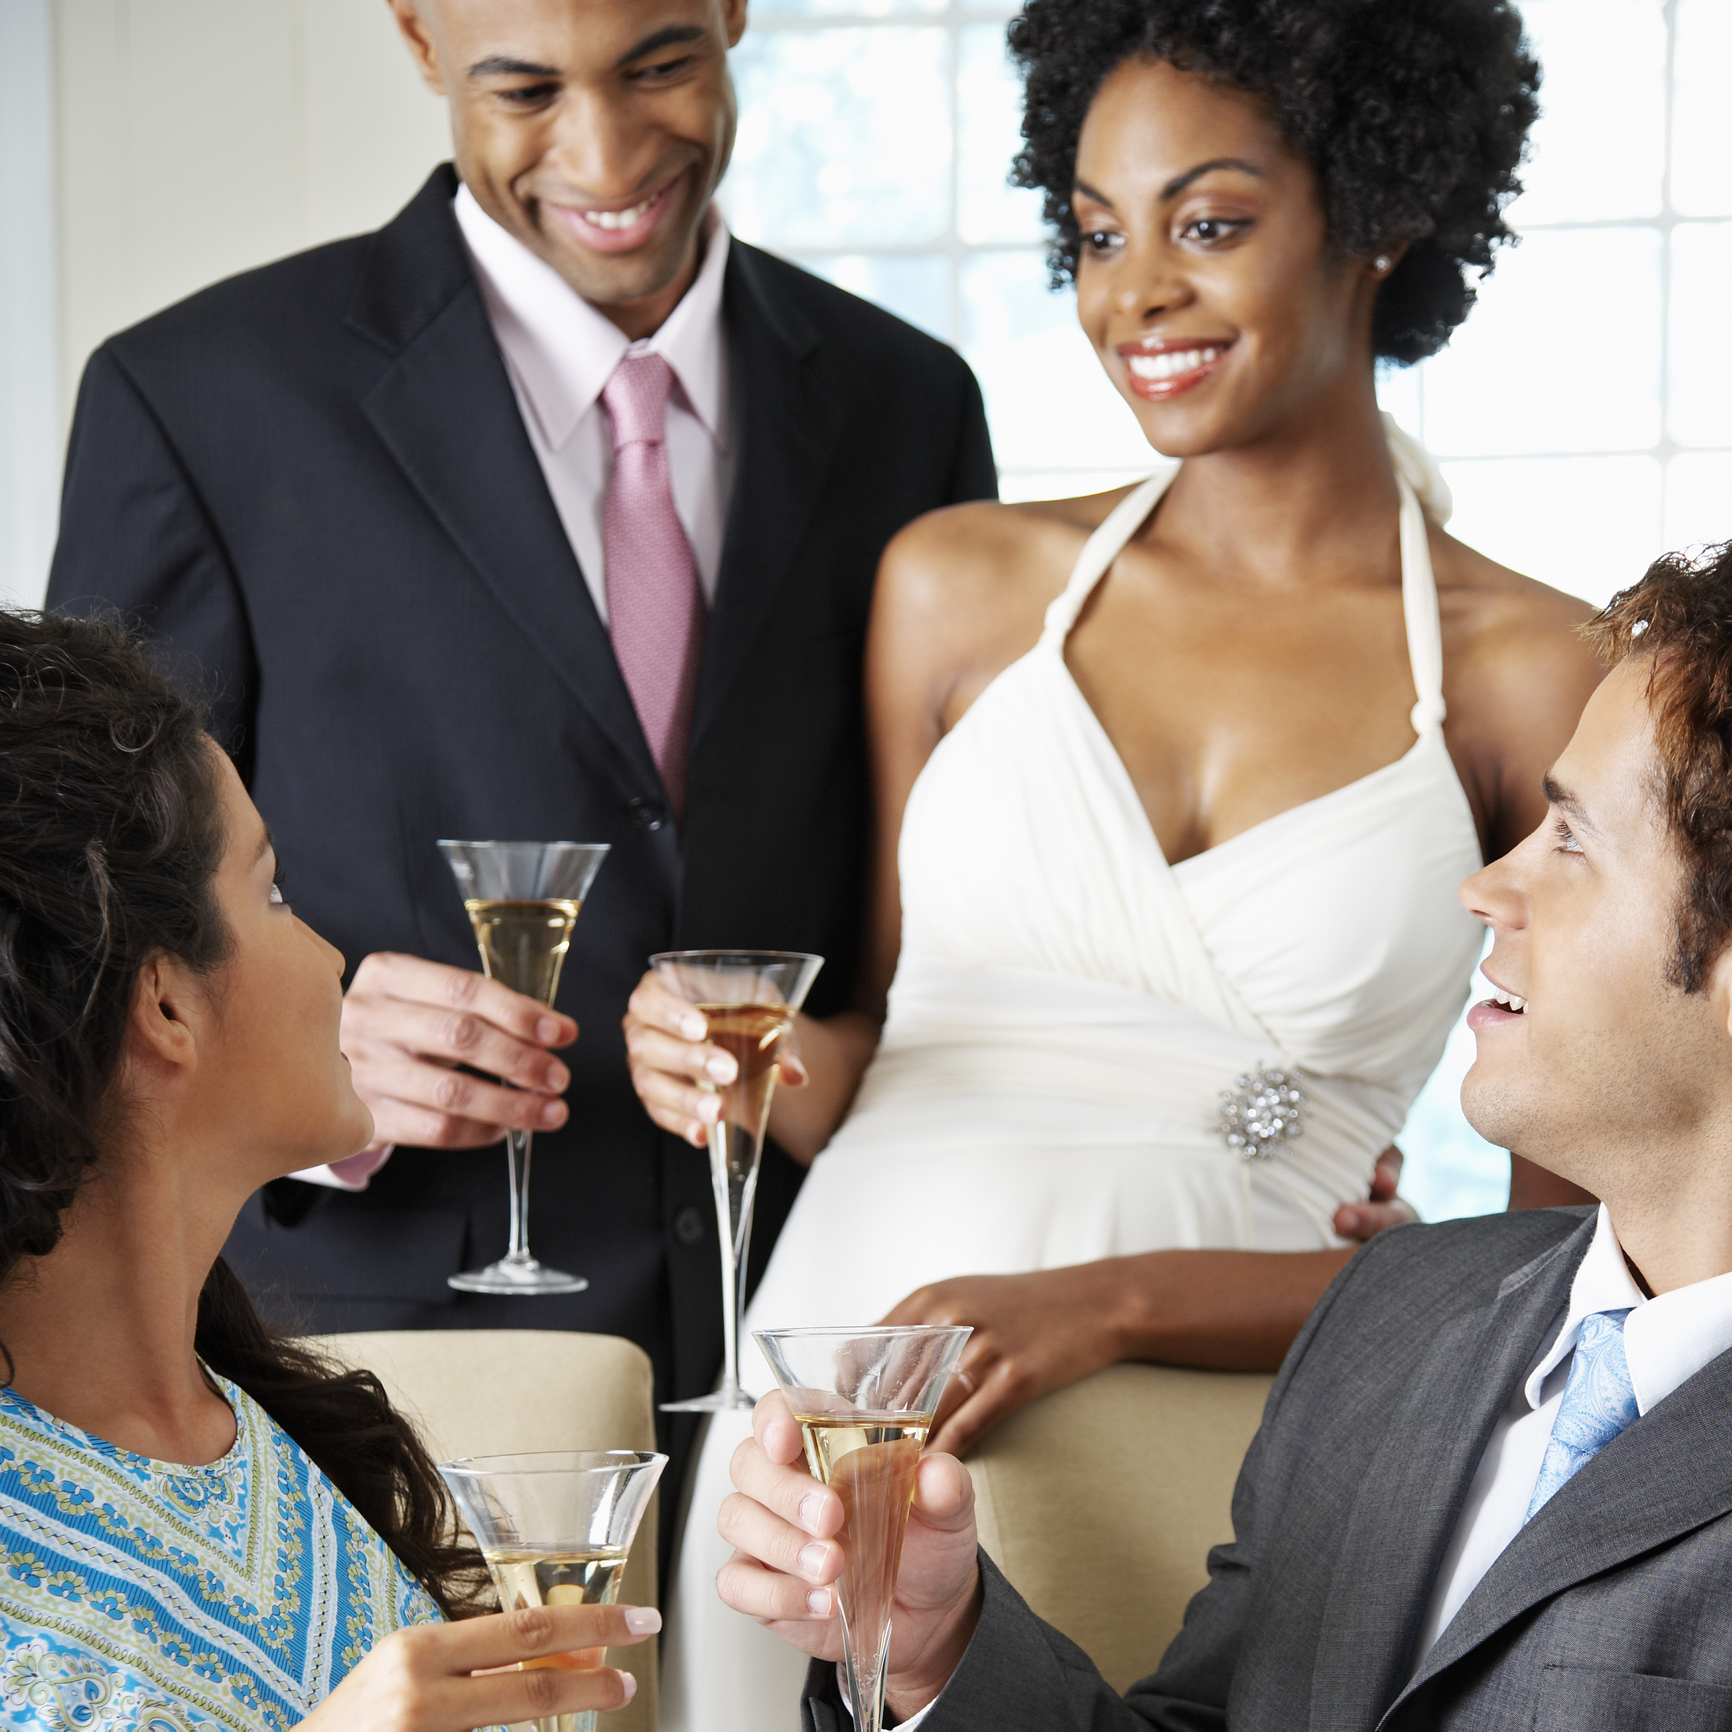 Couple and Guests Toasting at Wedding Reception